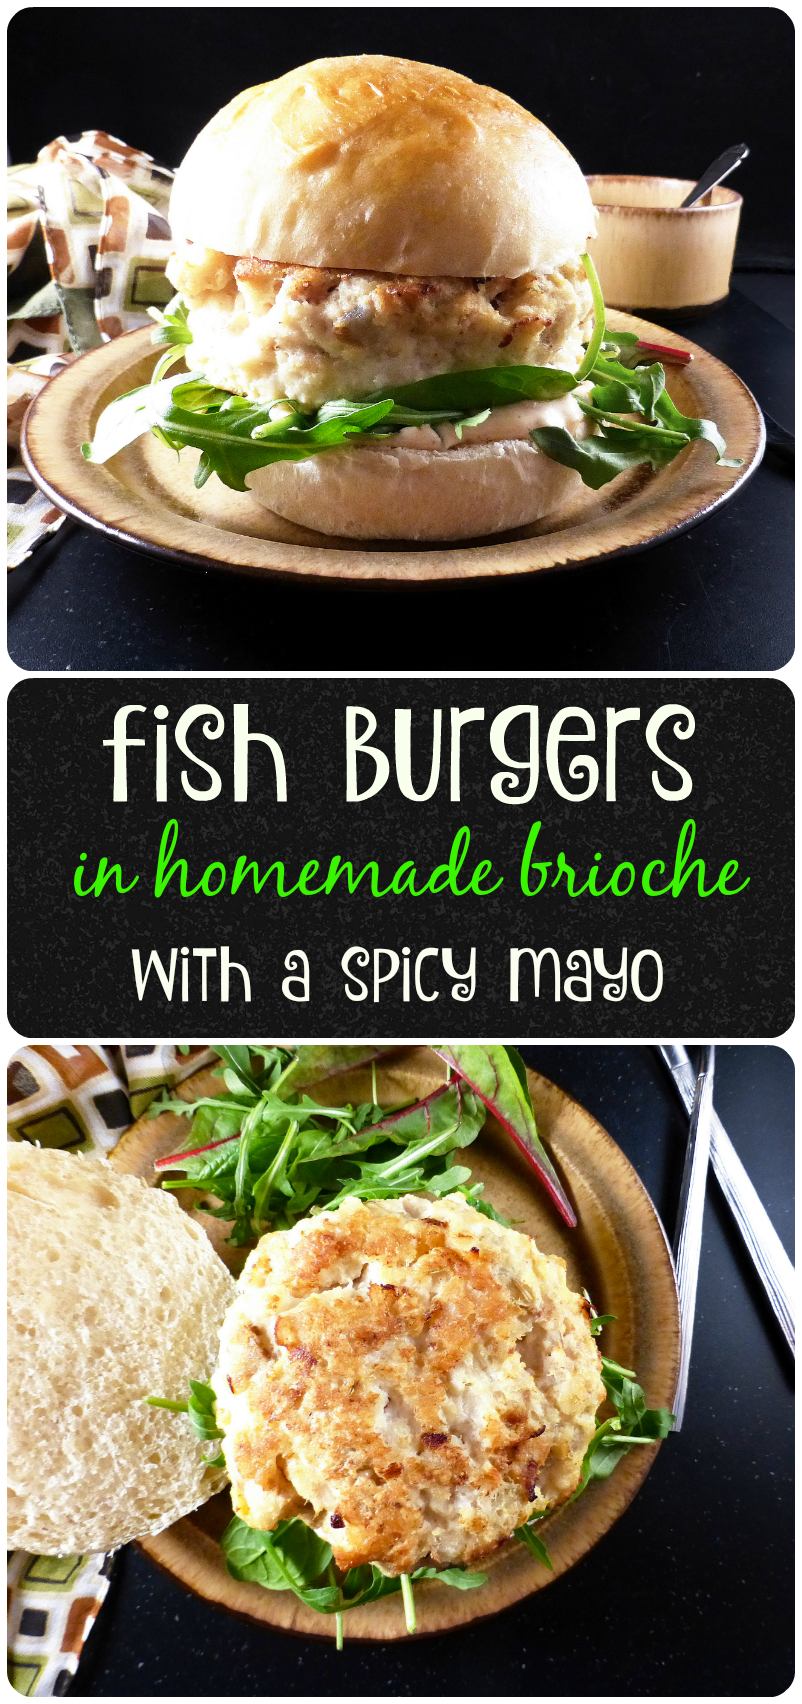 Fish Burgers with a Spicy Shallot Mayonnaise in Homemade Soft Spelt Buns